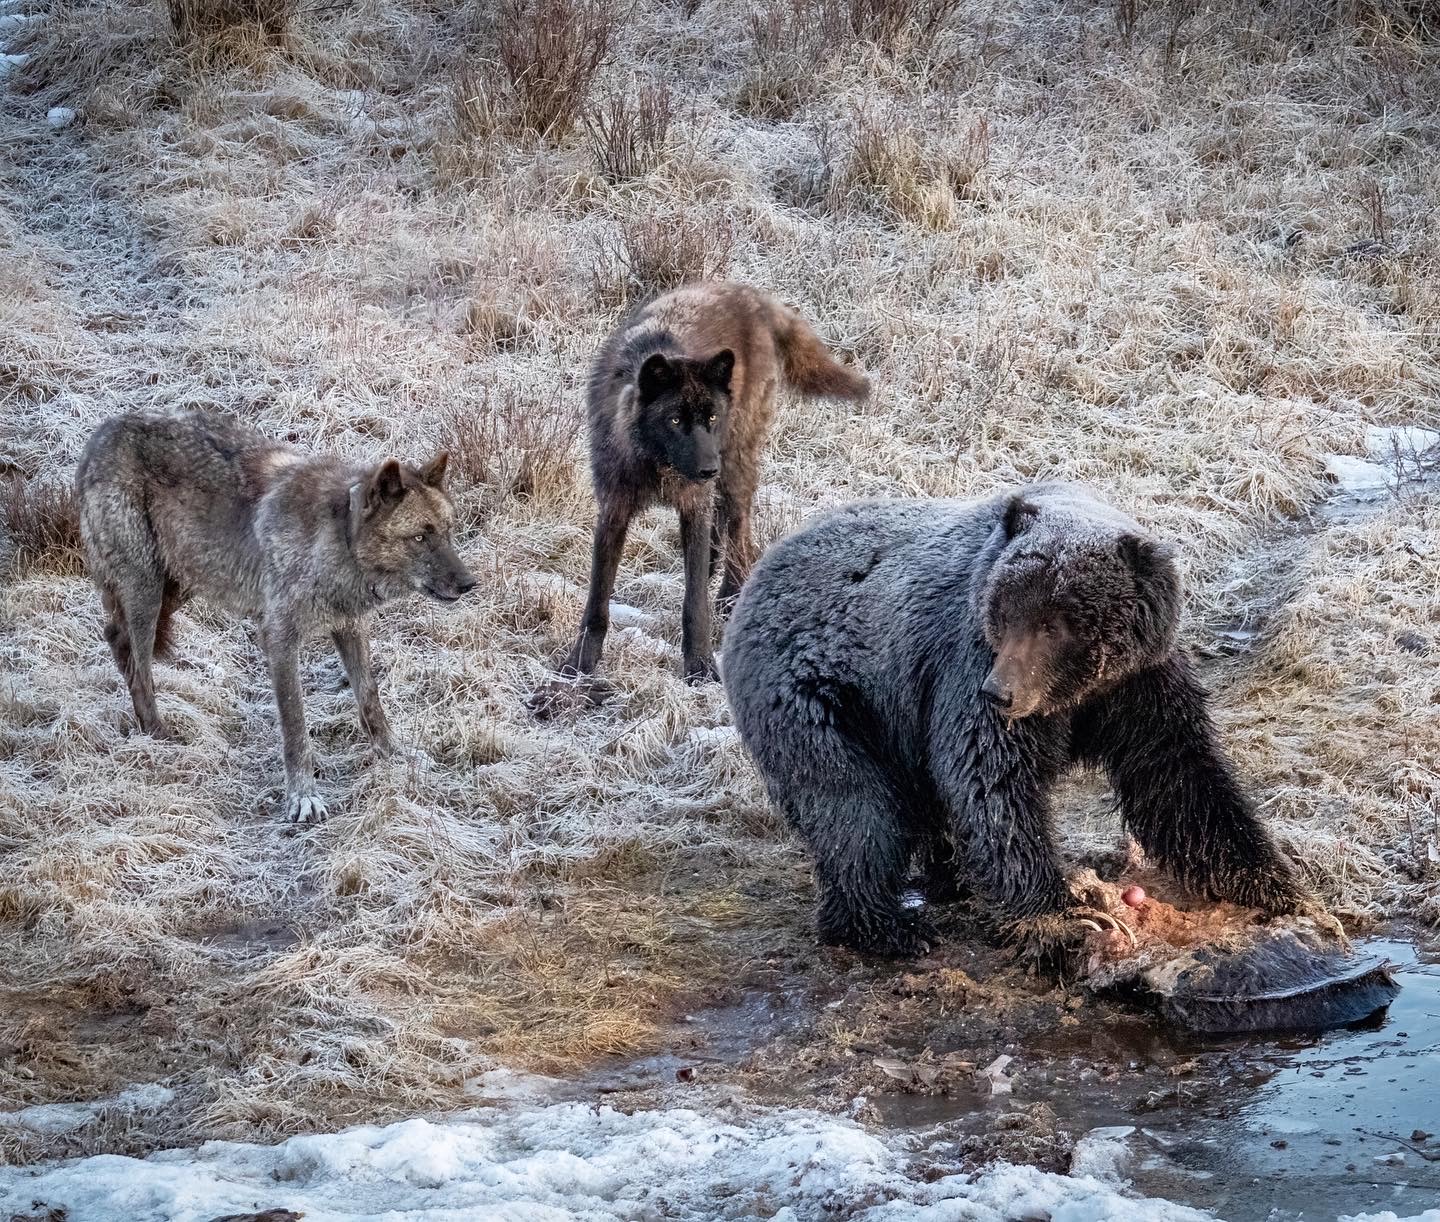 Wolves & grizzly bear © Ben Bluhm